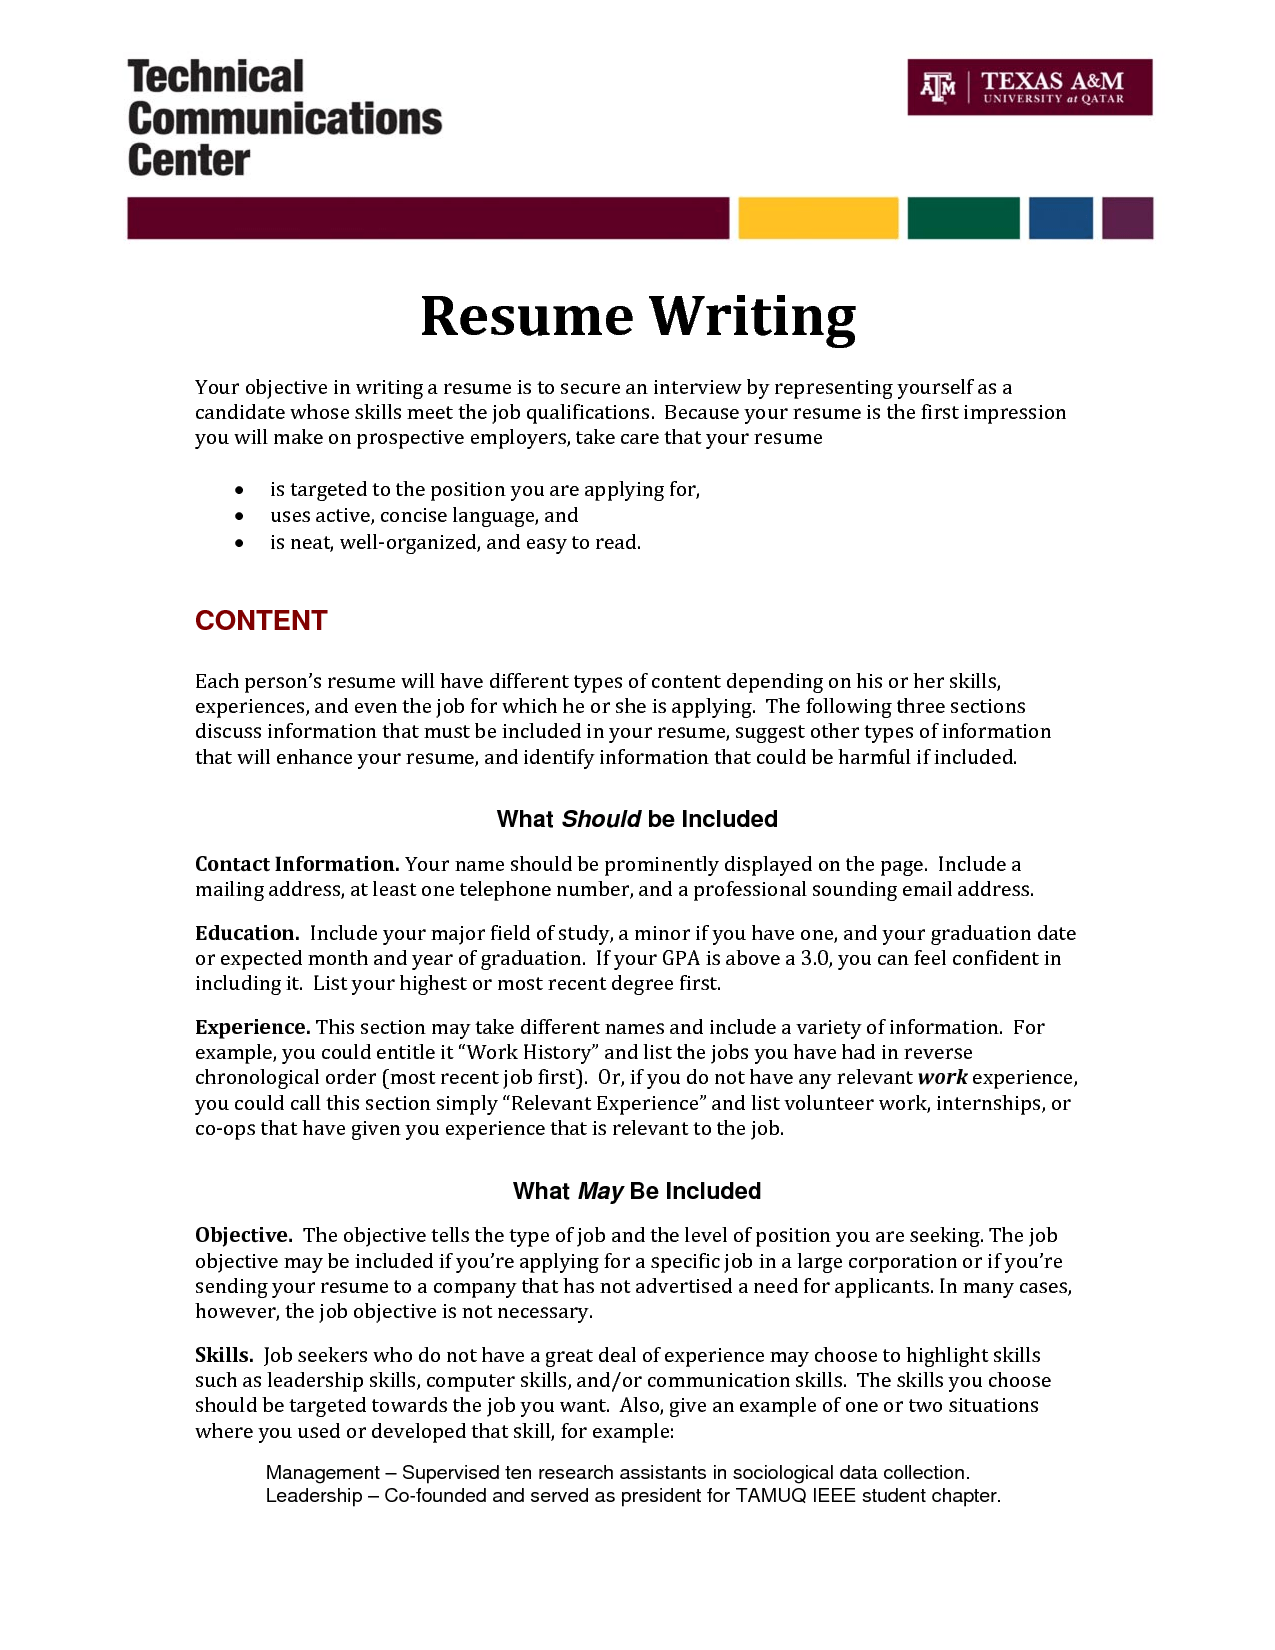 How To Write A Resume? - Fotolip